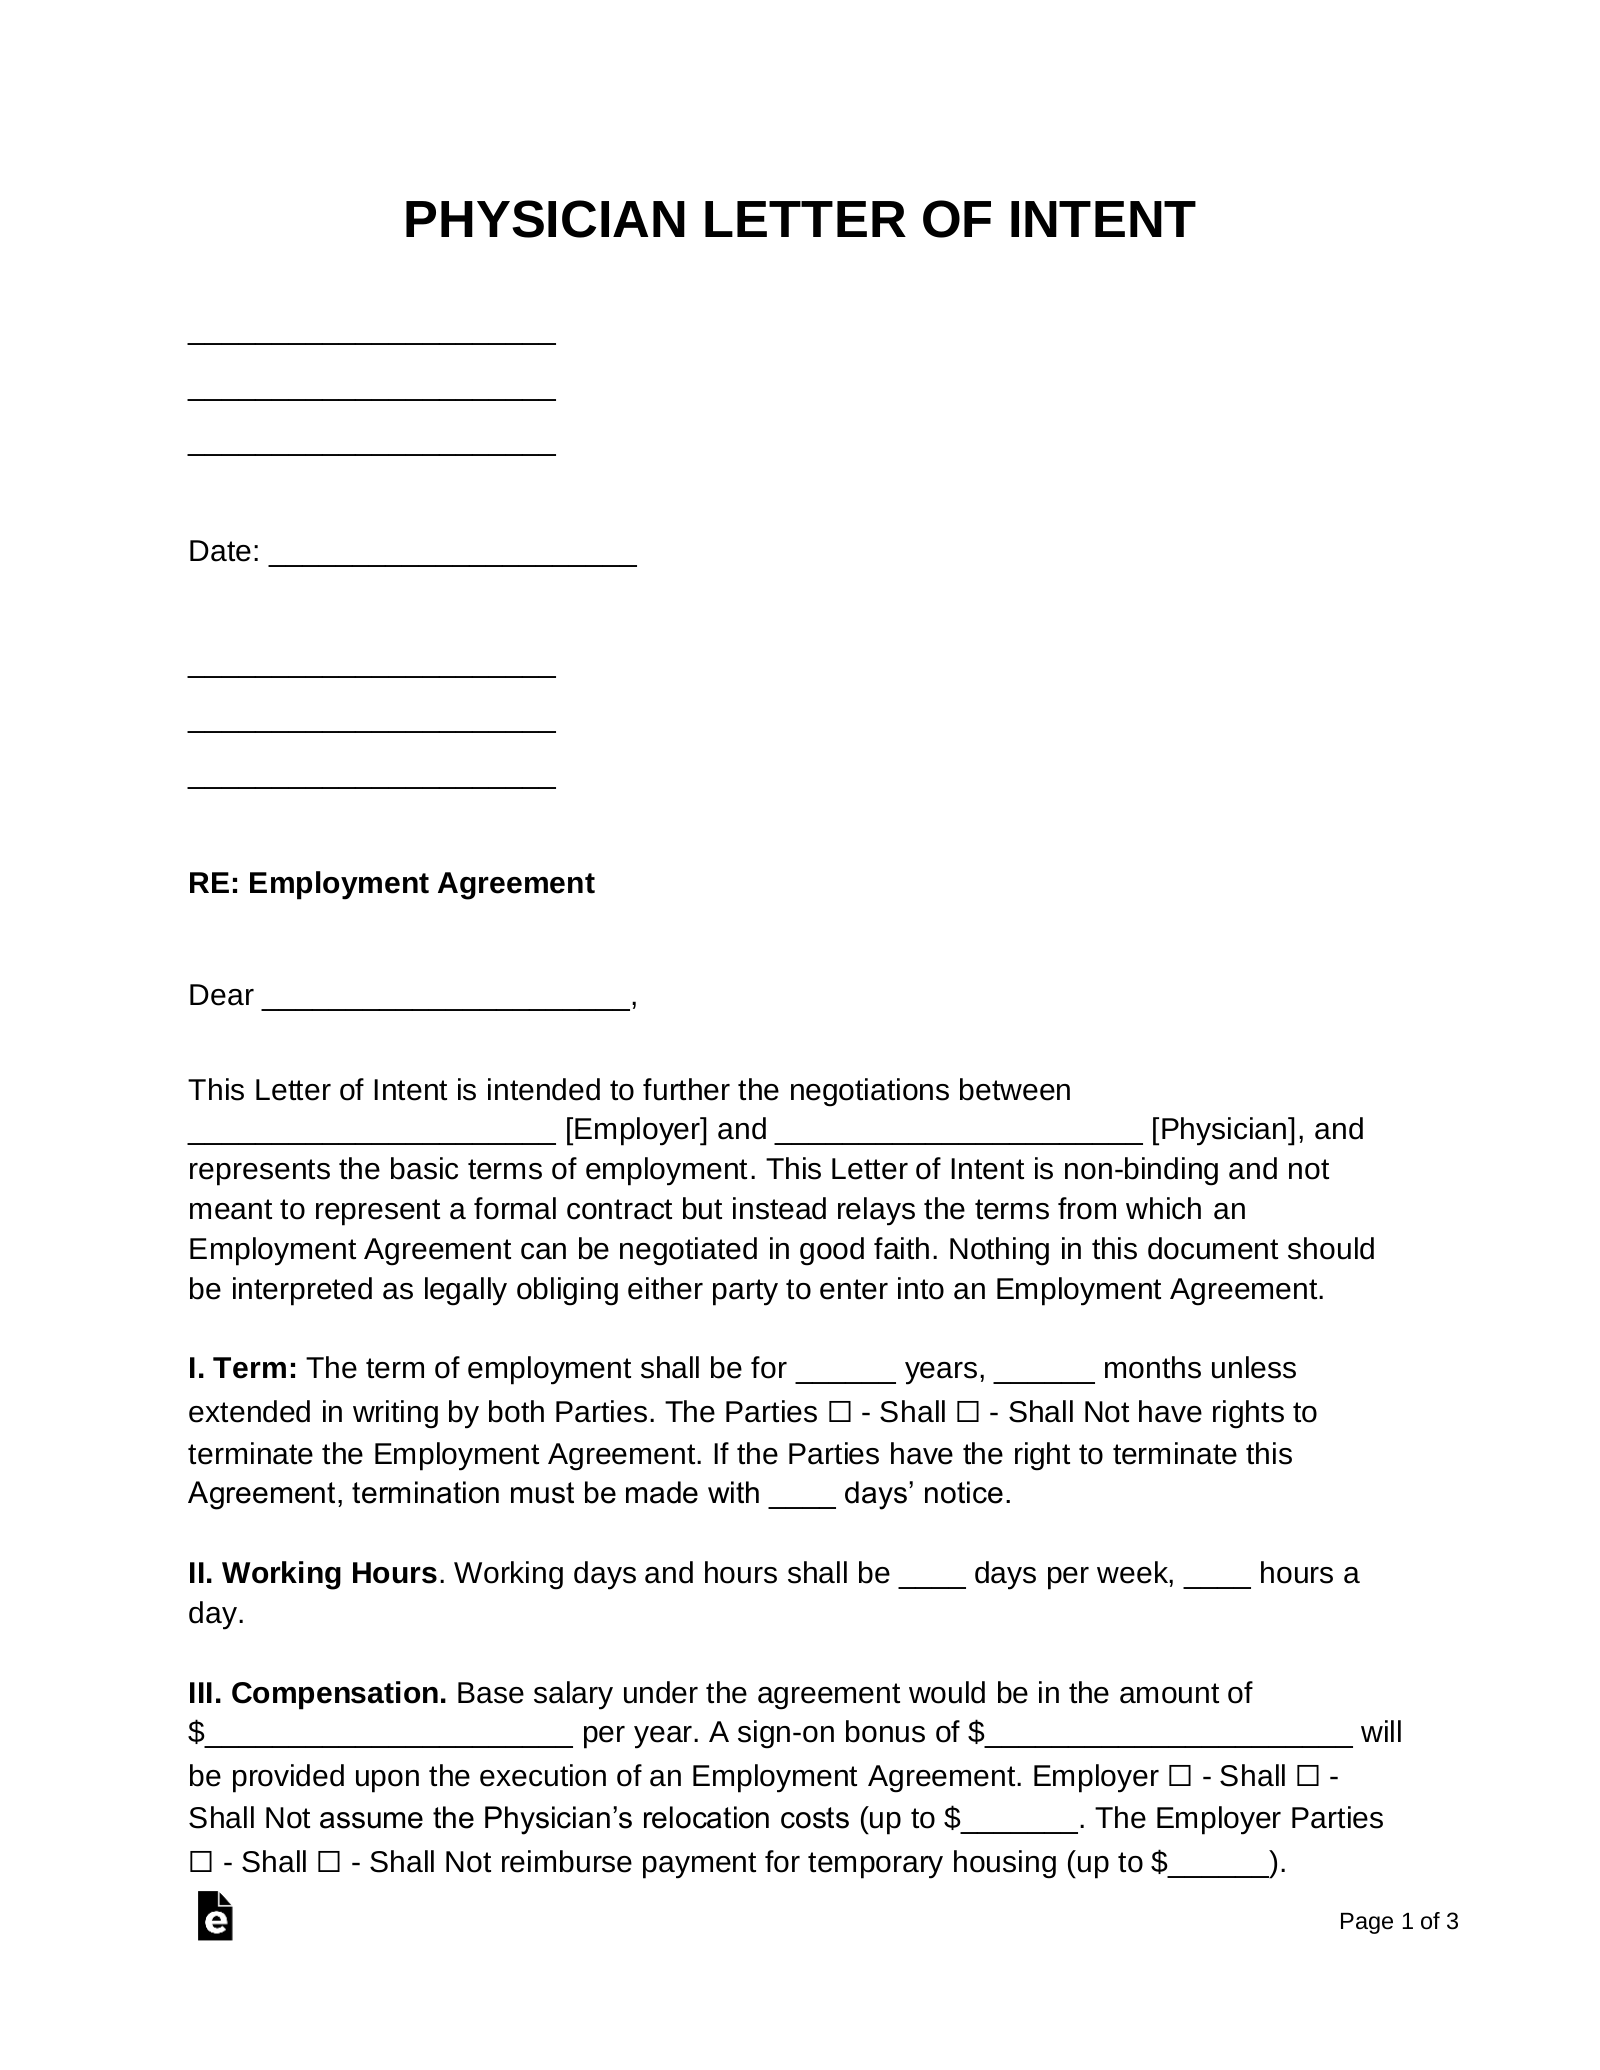 Letter Of Intent To Hire Template